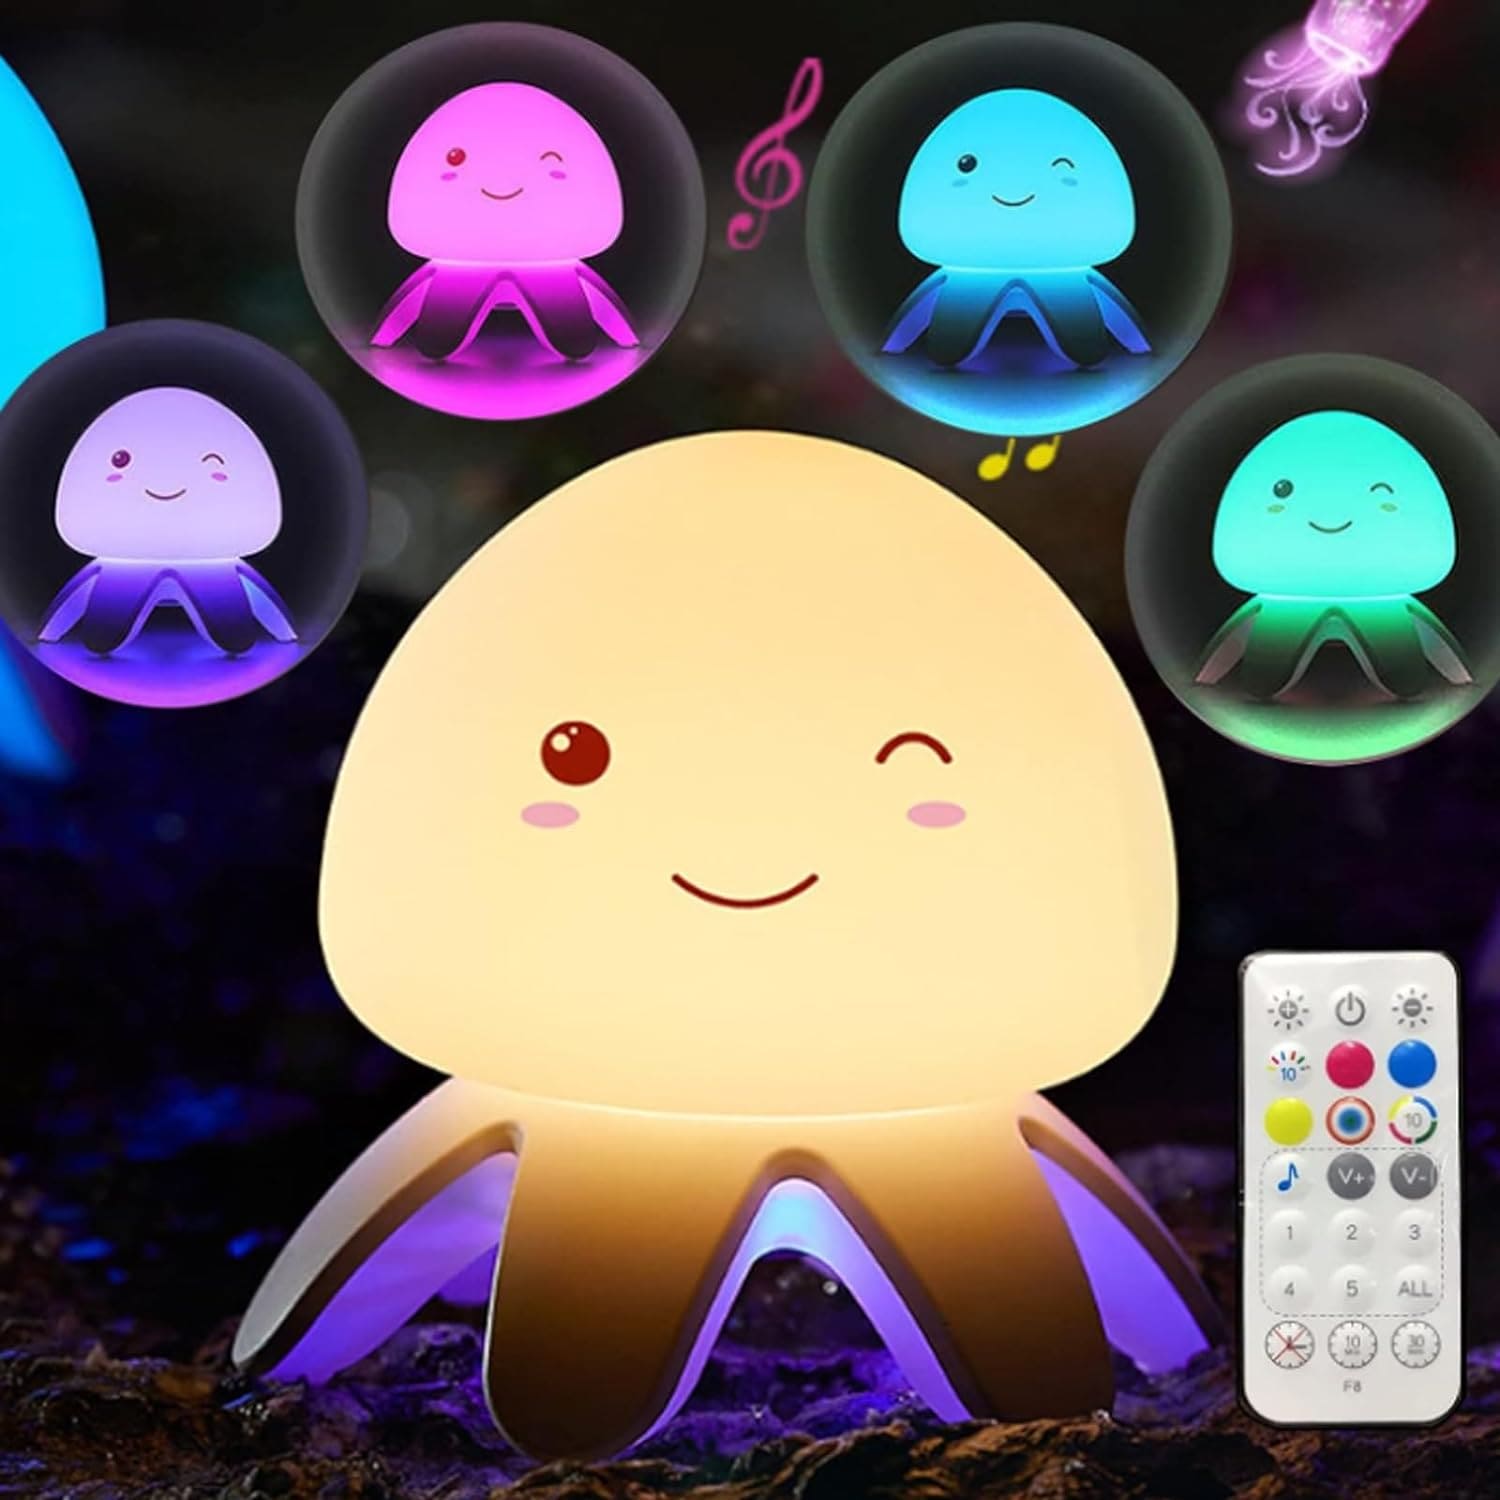 Jellyfish Night Light, Music Clapping Small Night Light, Color Changing Nursery Night Light with Remote Control, Rechargeable LED Jellyfish Lamp, Tap Control with Music Night Lights for Kids Room